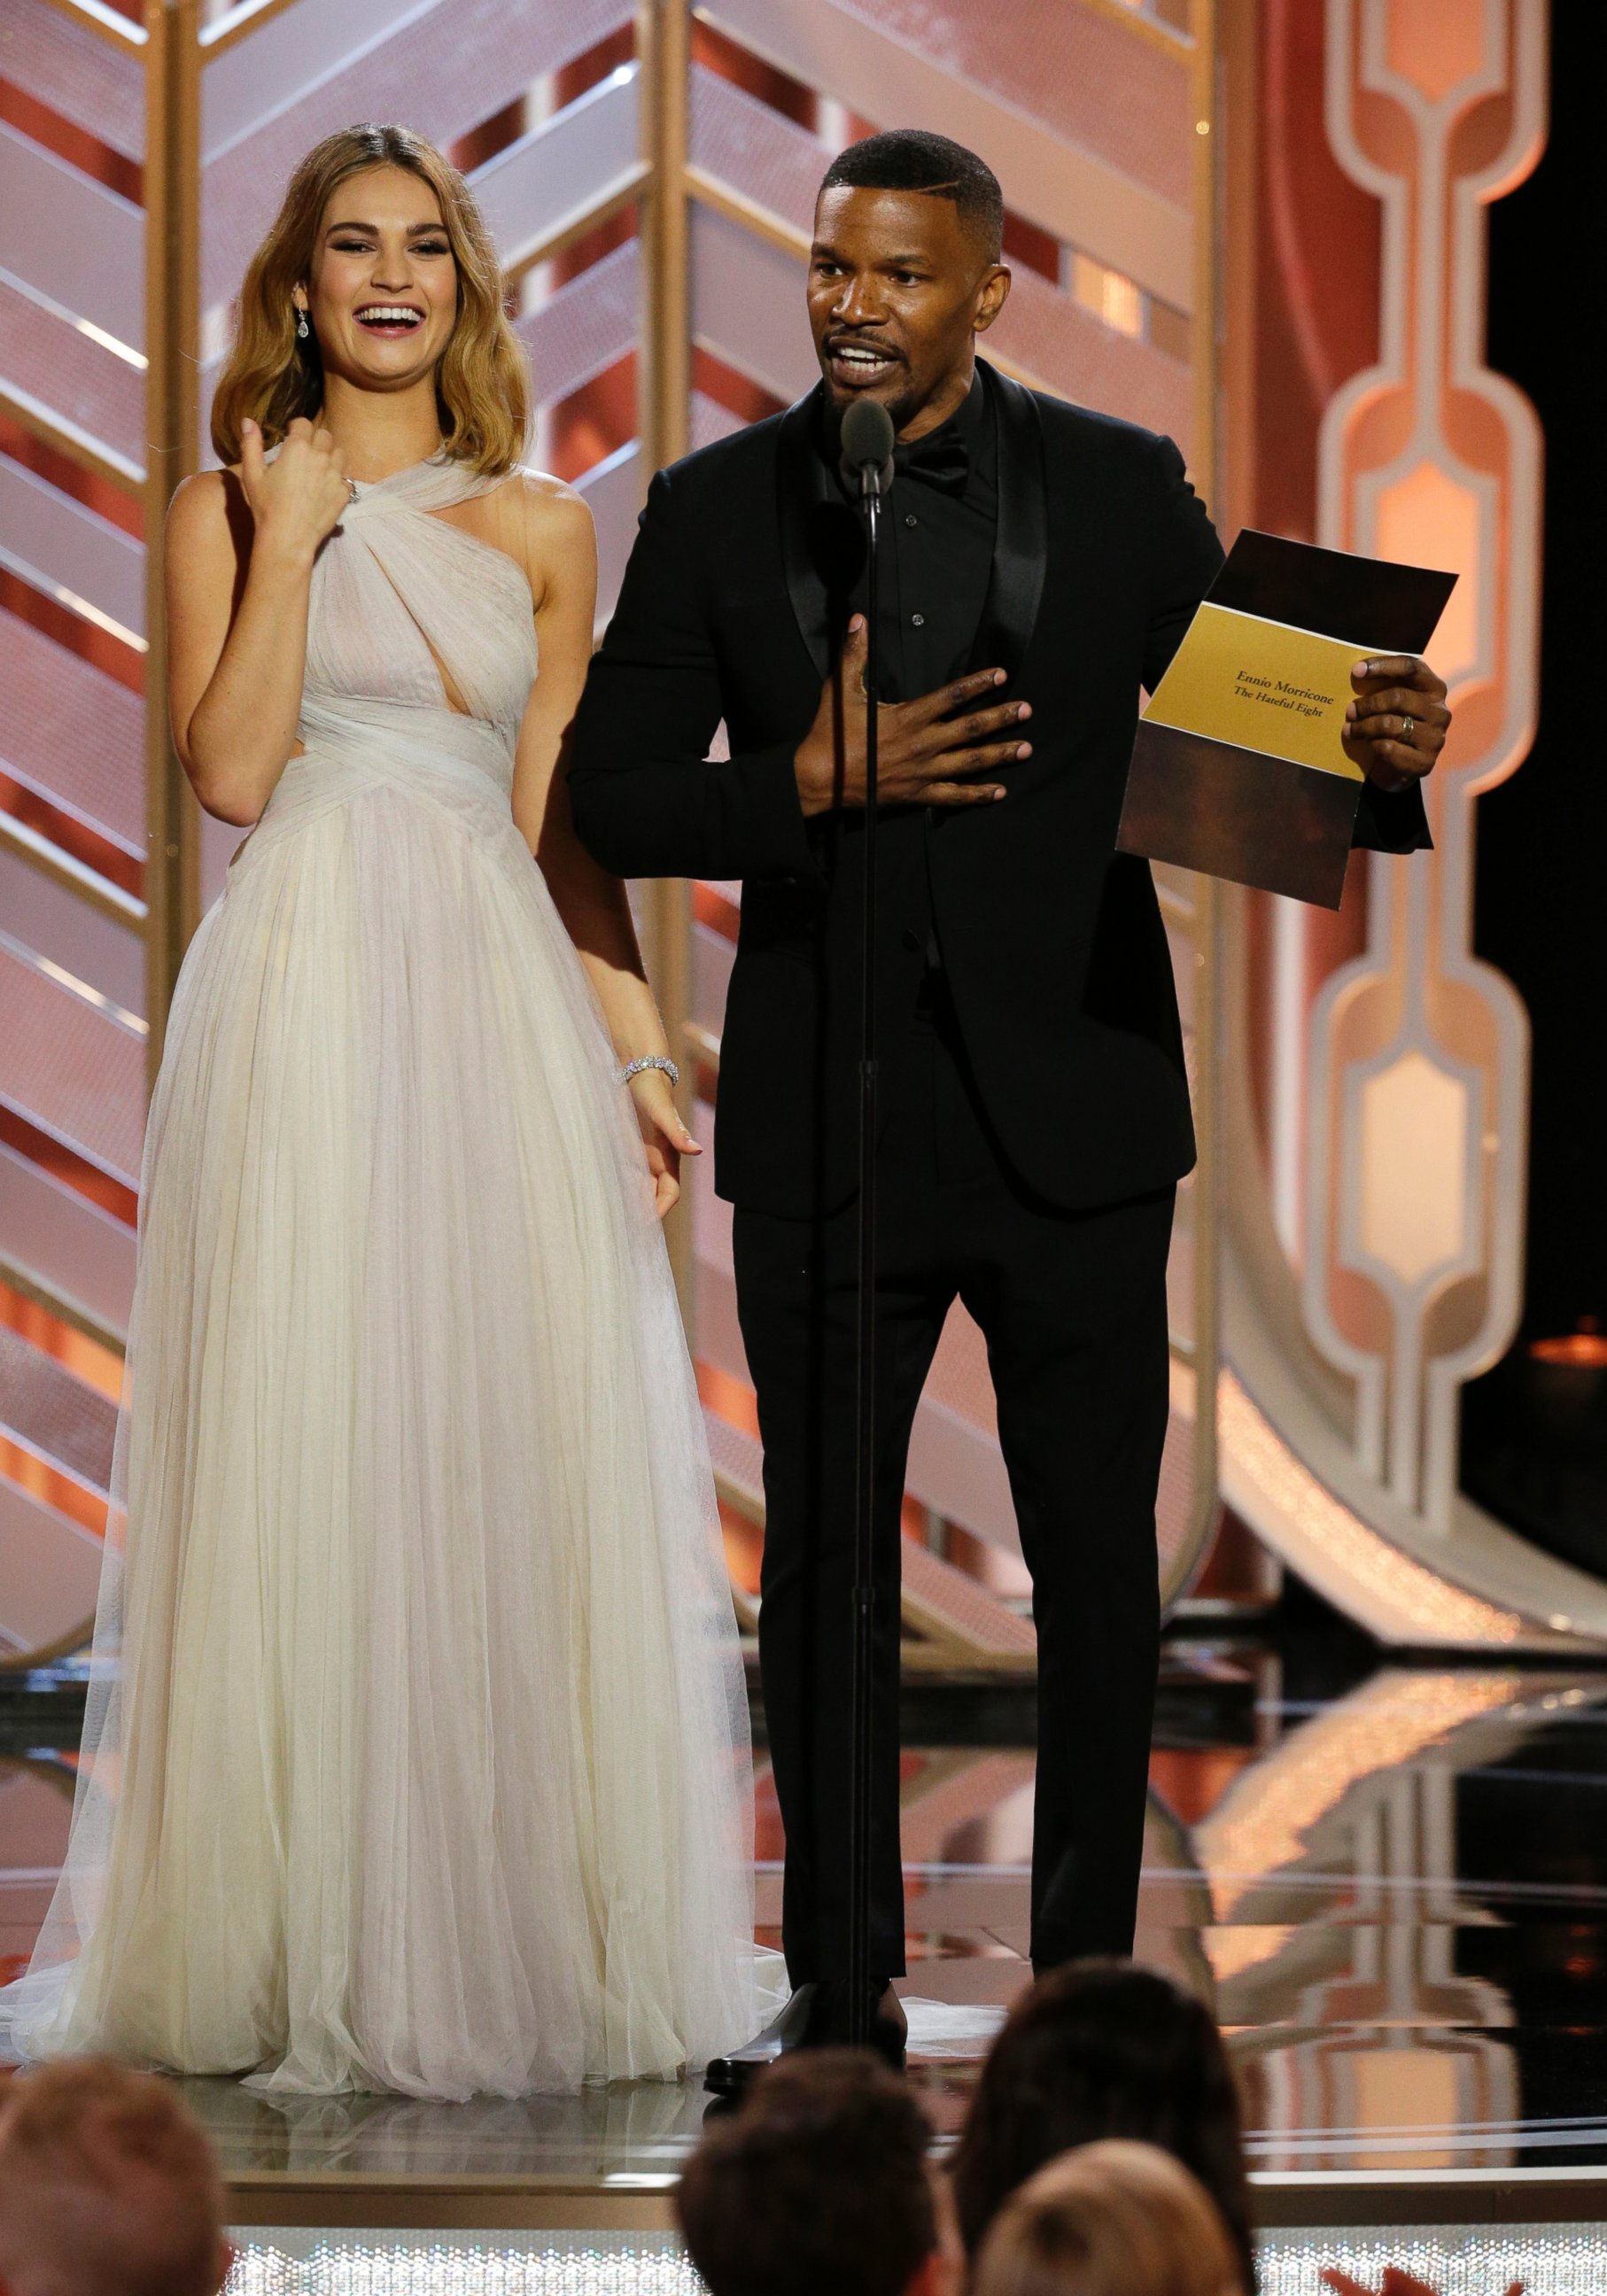 PHOTO: Lily James and  Jamie Foxx present an award at the 73rd Annual Golden Globe Awards at the Beverly Hilton Hotel in Beverly Hills, Calif., on Jan. 10, 2016.